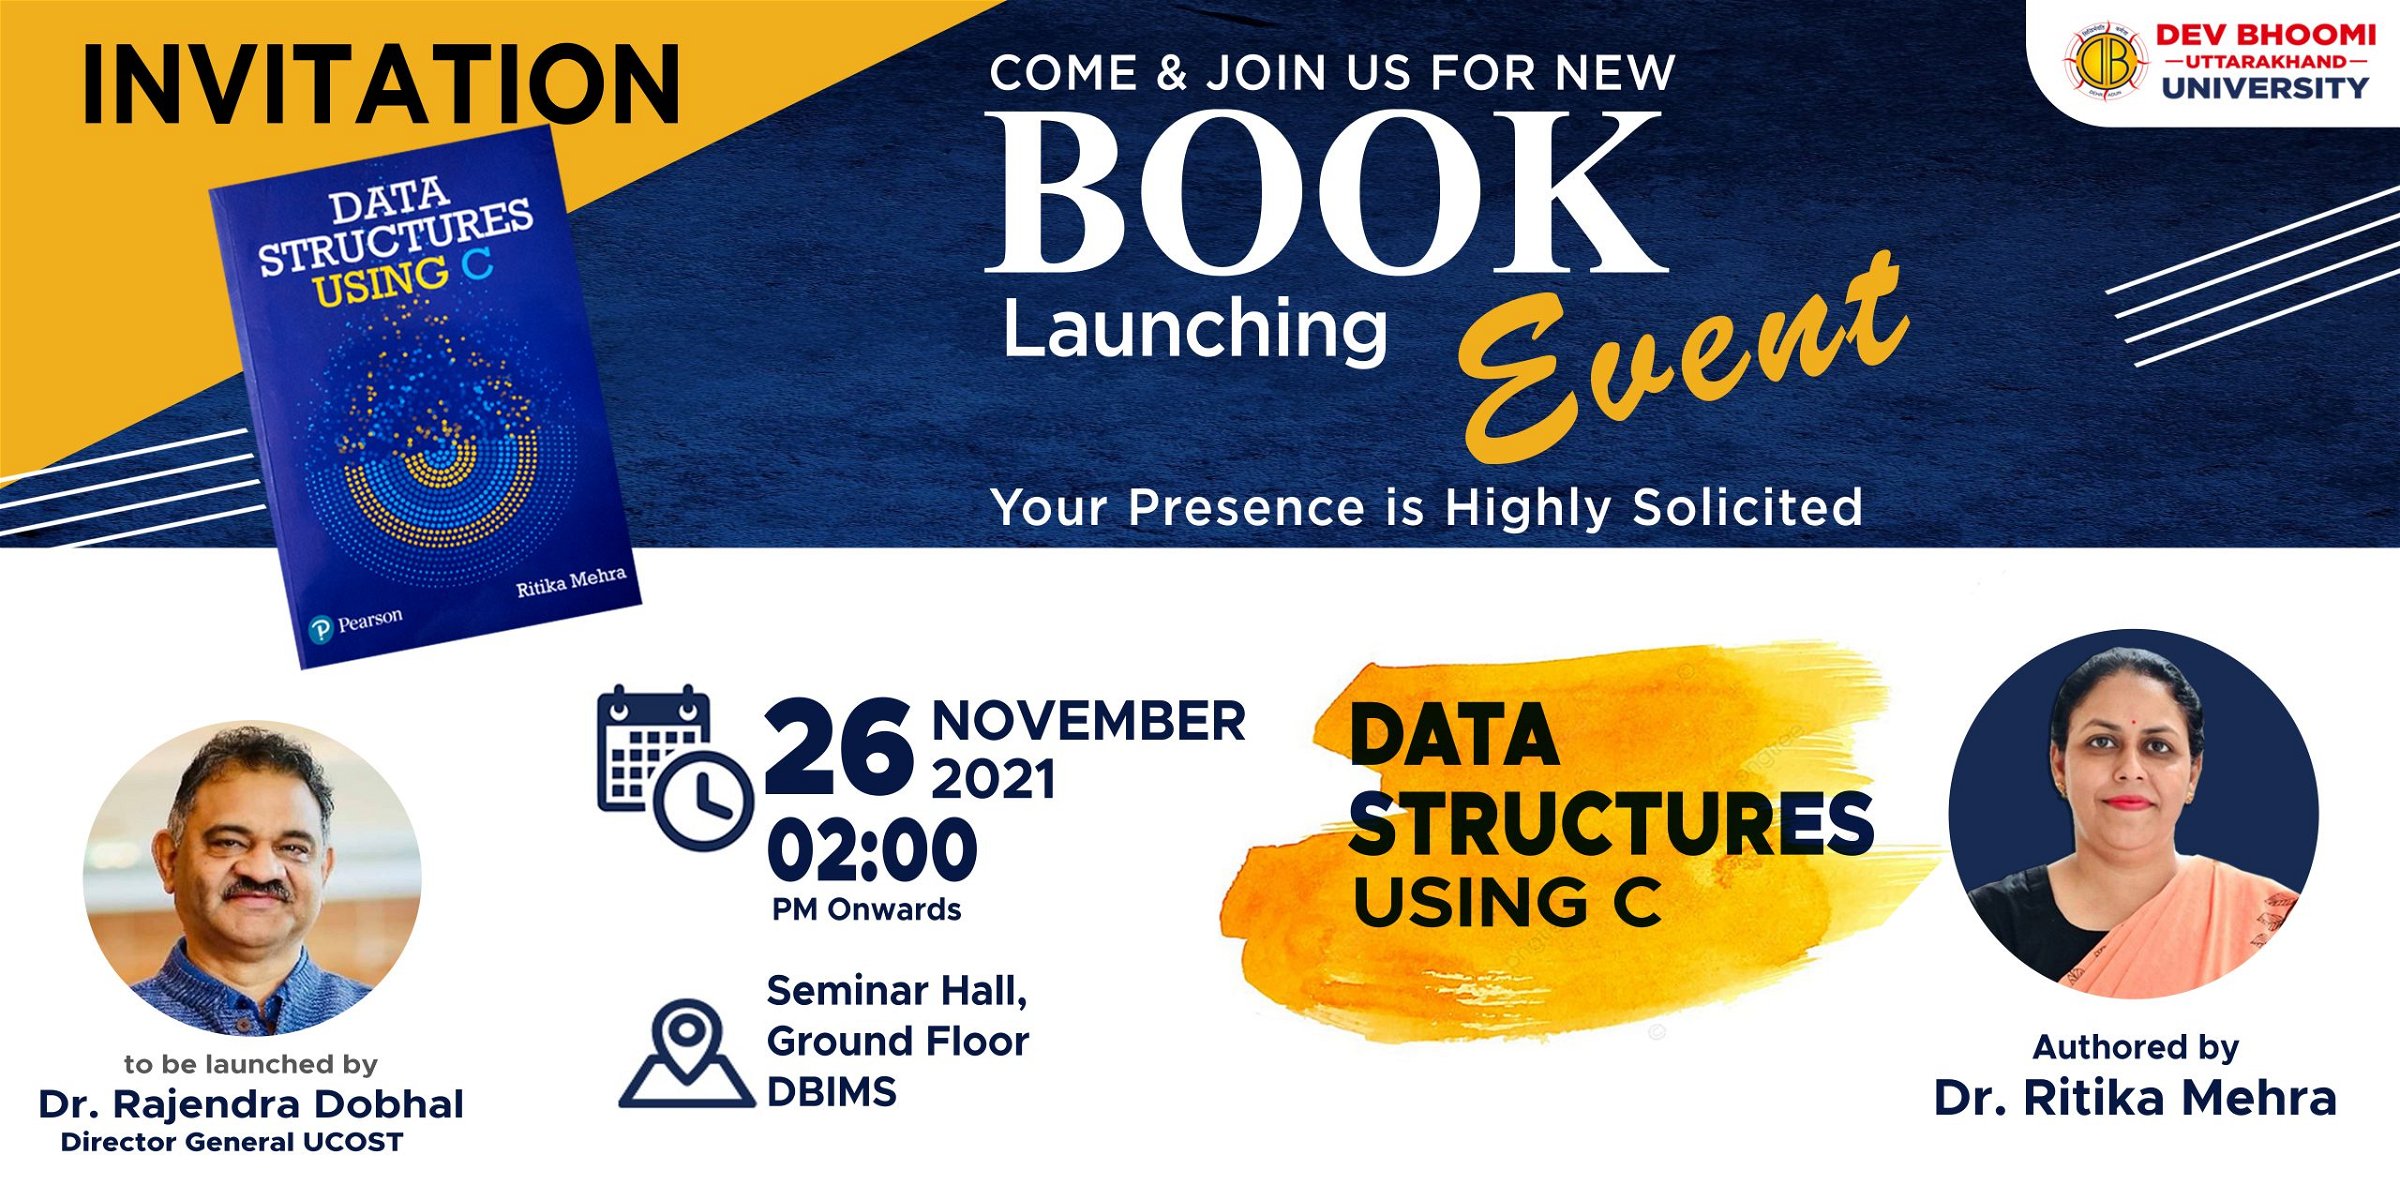 Book Launching of “Data Structure Using C” Written by Dr. Ritika  Mehra